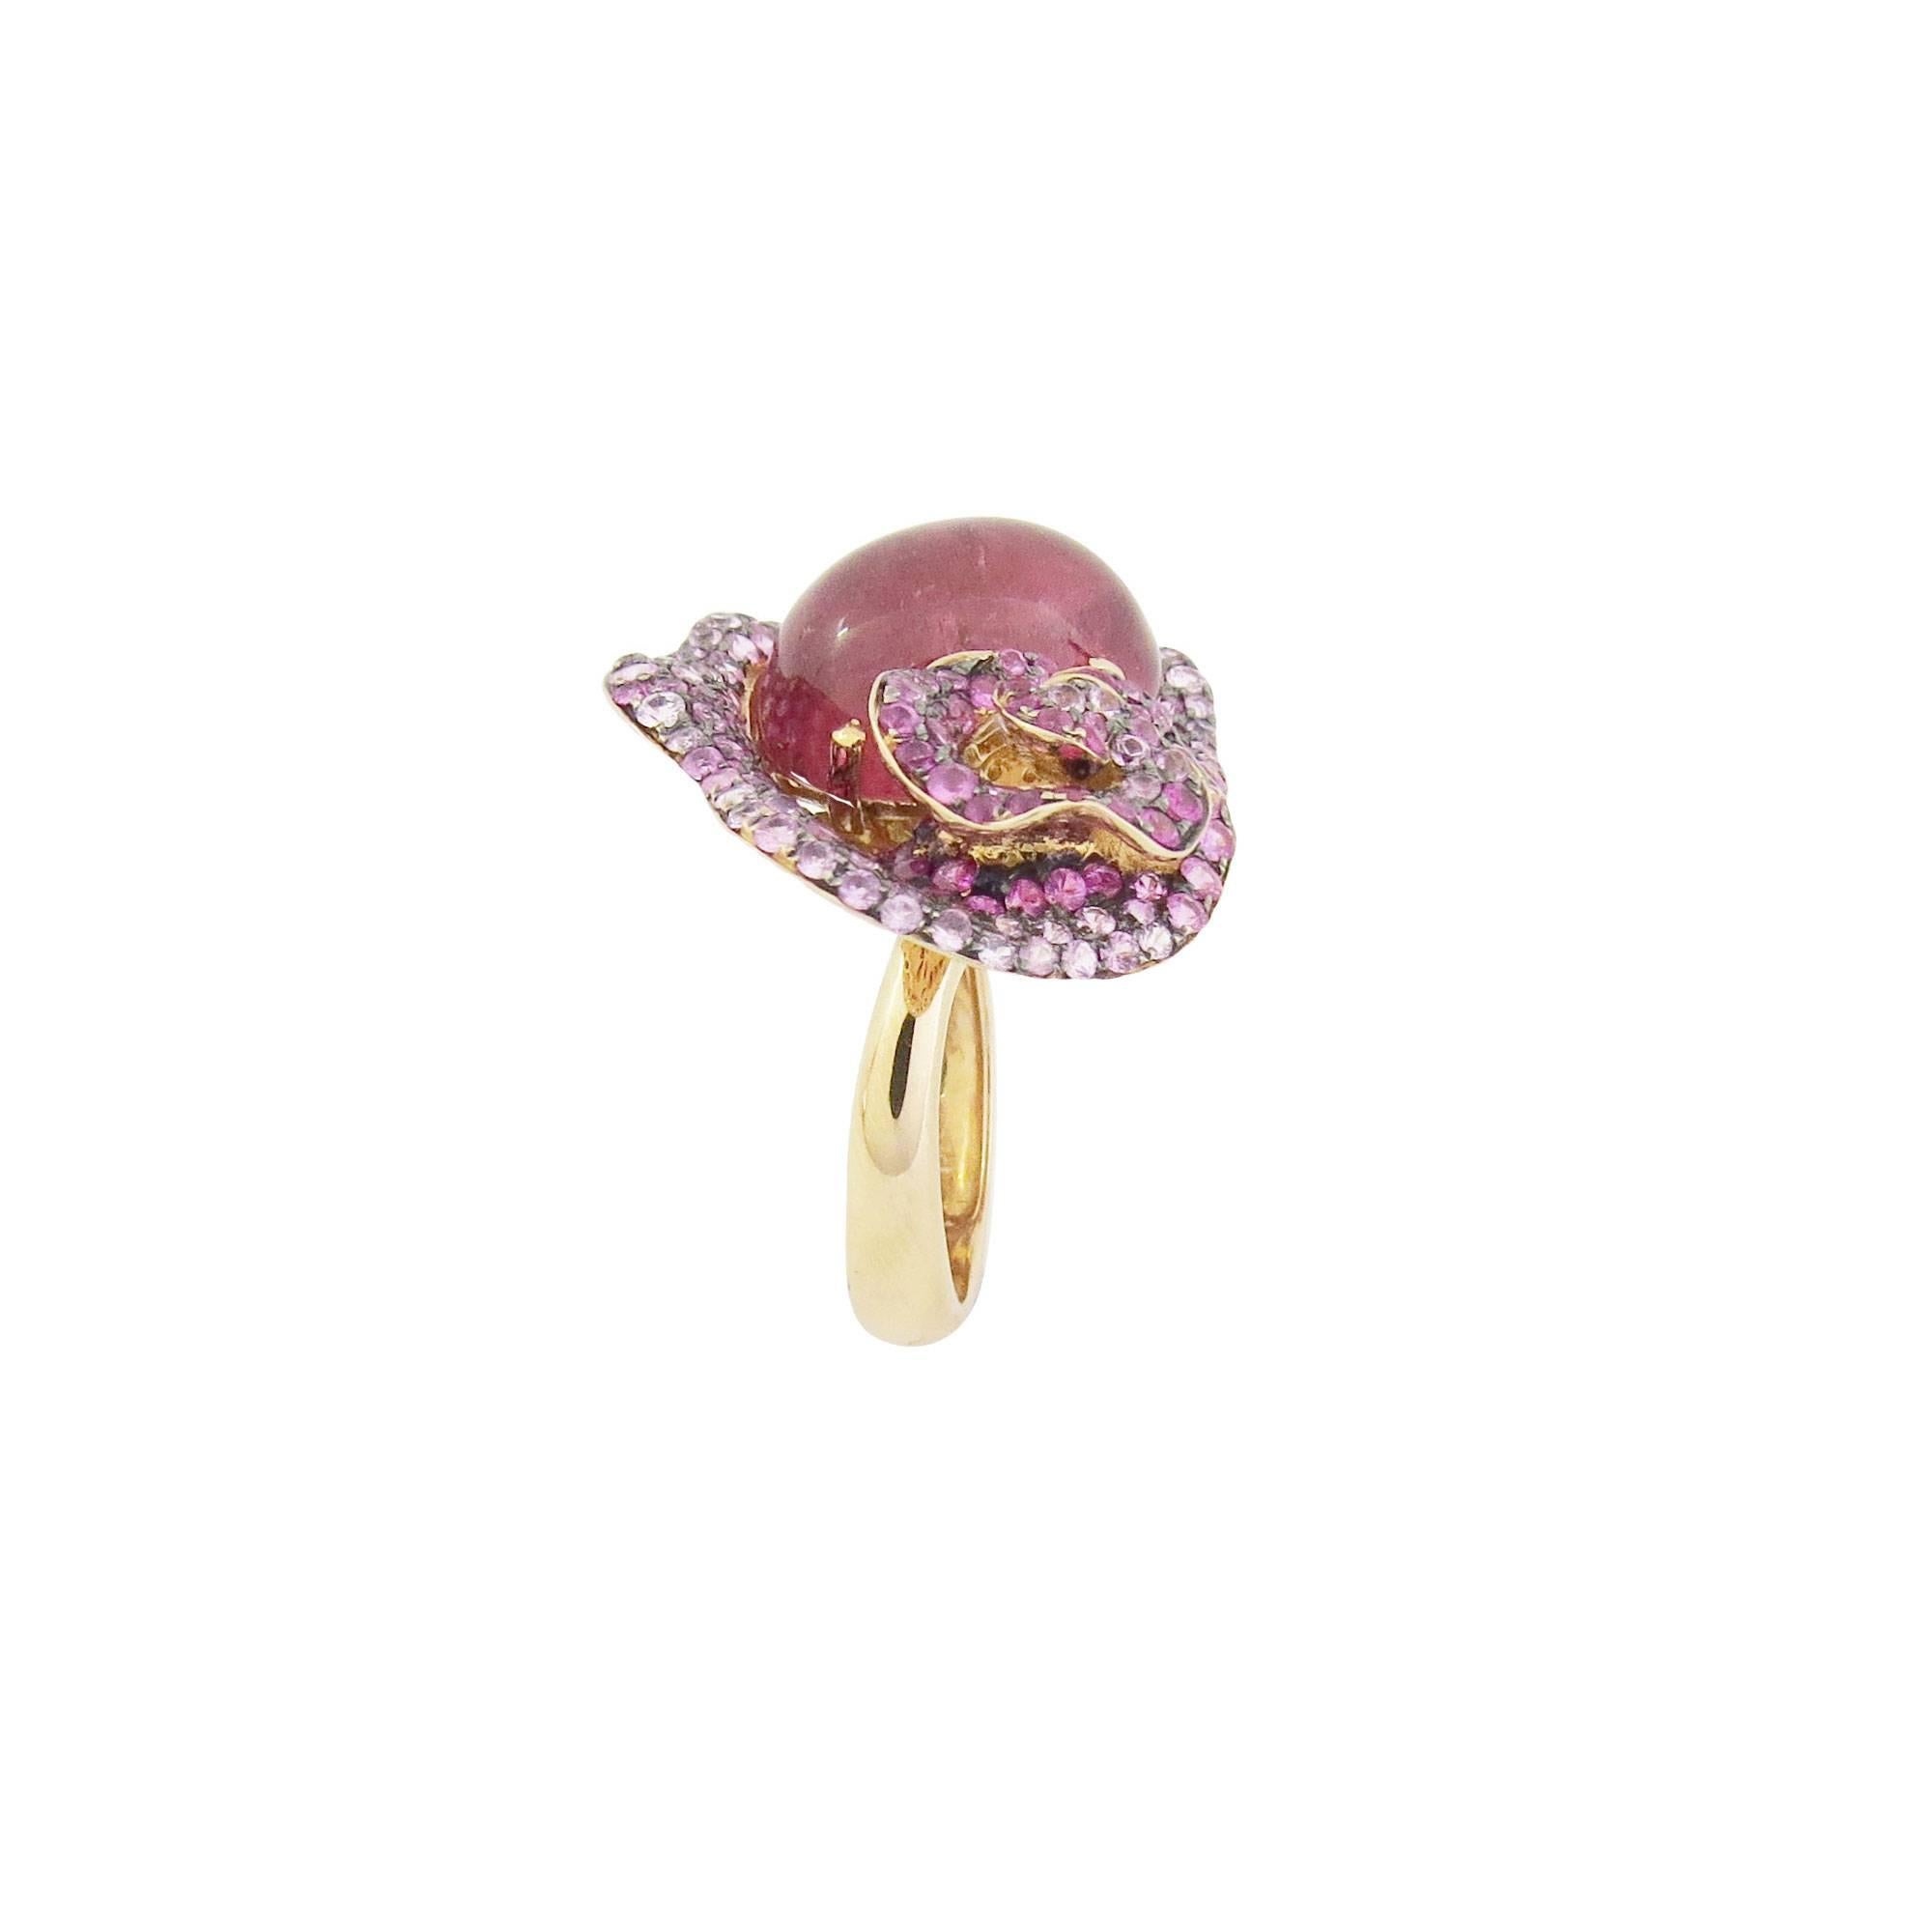 Description:
Fei Liu one-off ring with 12.32ct rubellite cabochon and 2.52ct pink sapphires, set in 18ct rose gold.

Ring size: M (UK) / 6 1/2 (US)

Inspiration:
Capturing the natural beauty of the flowers. From unearthing to blossom; unfurling its